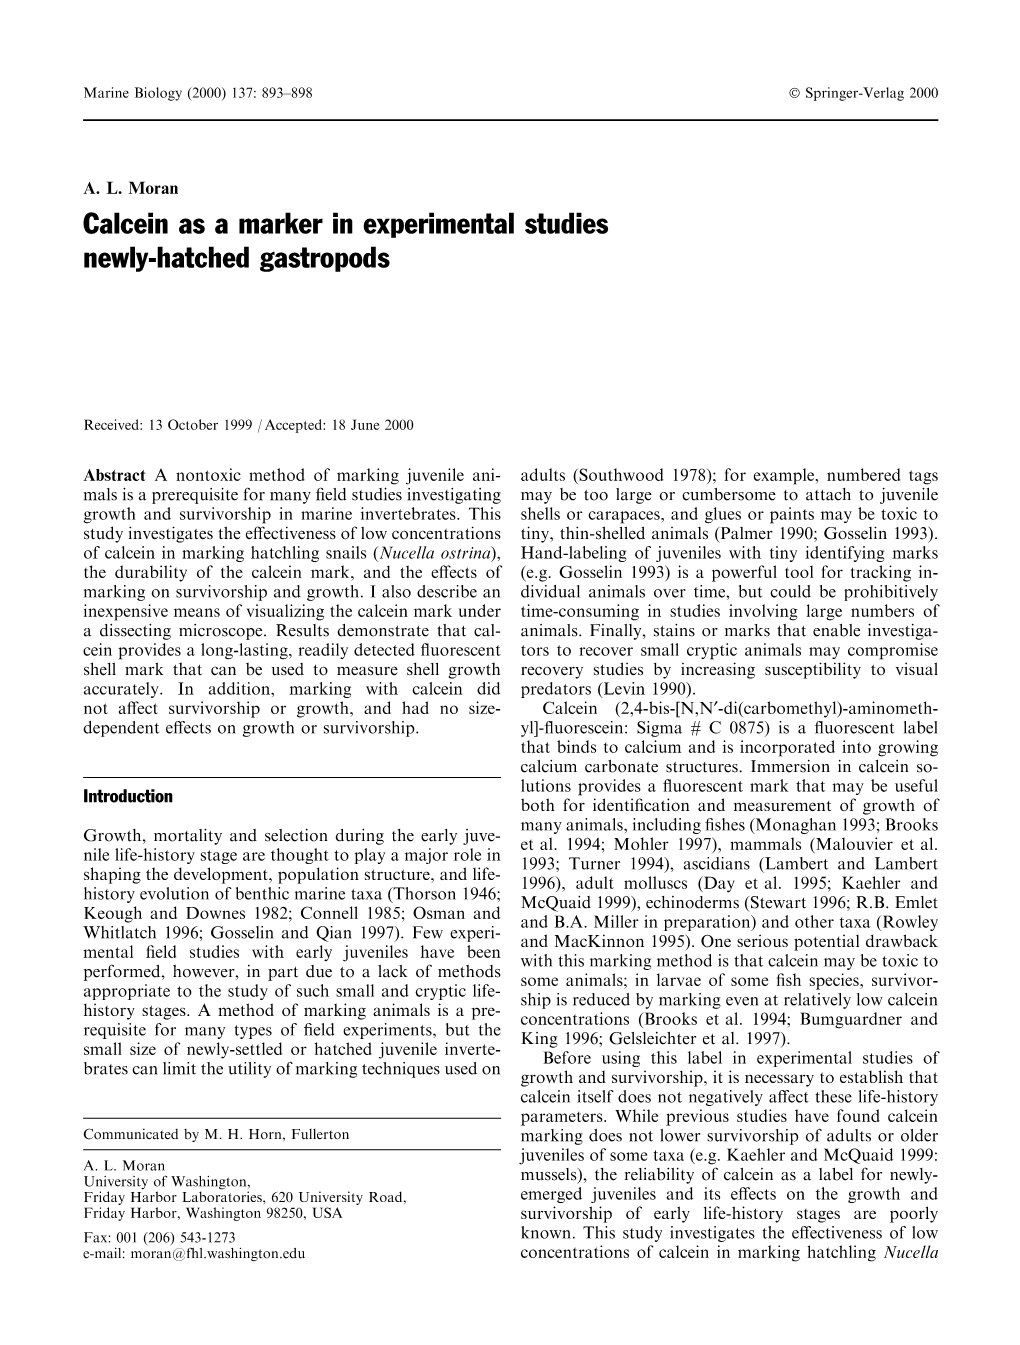 Calcein As a Marker in Experimental Studies Newly-Hatched Gastropods